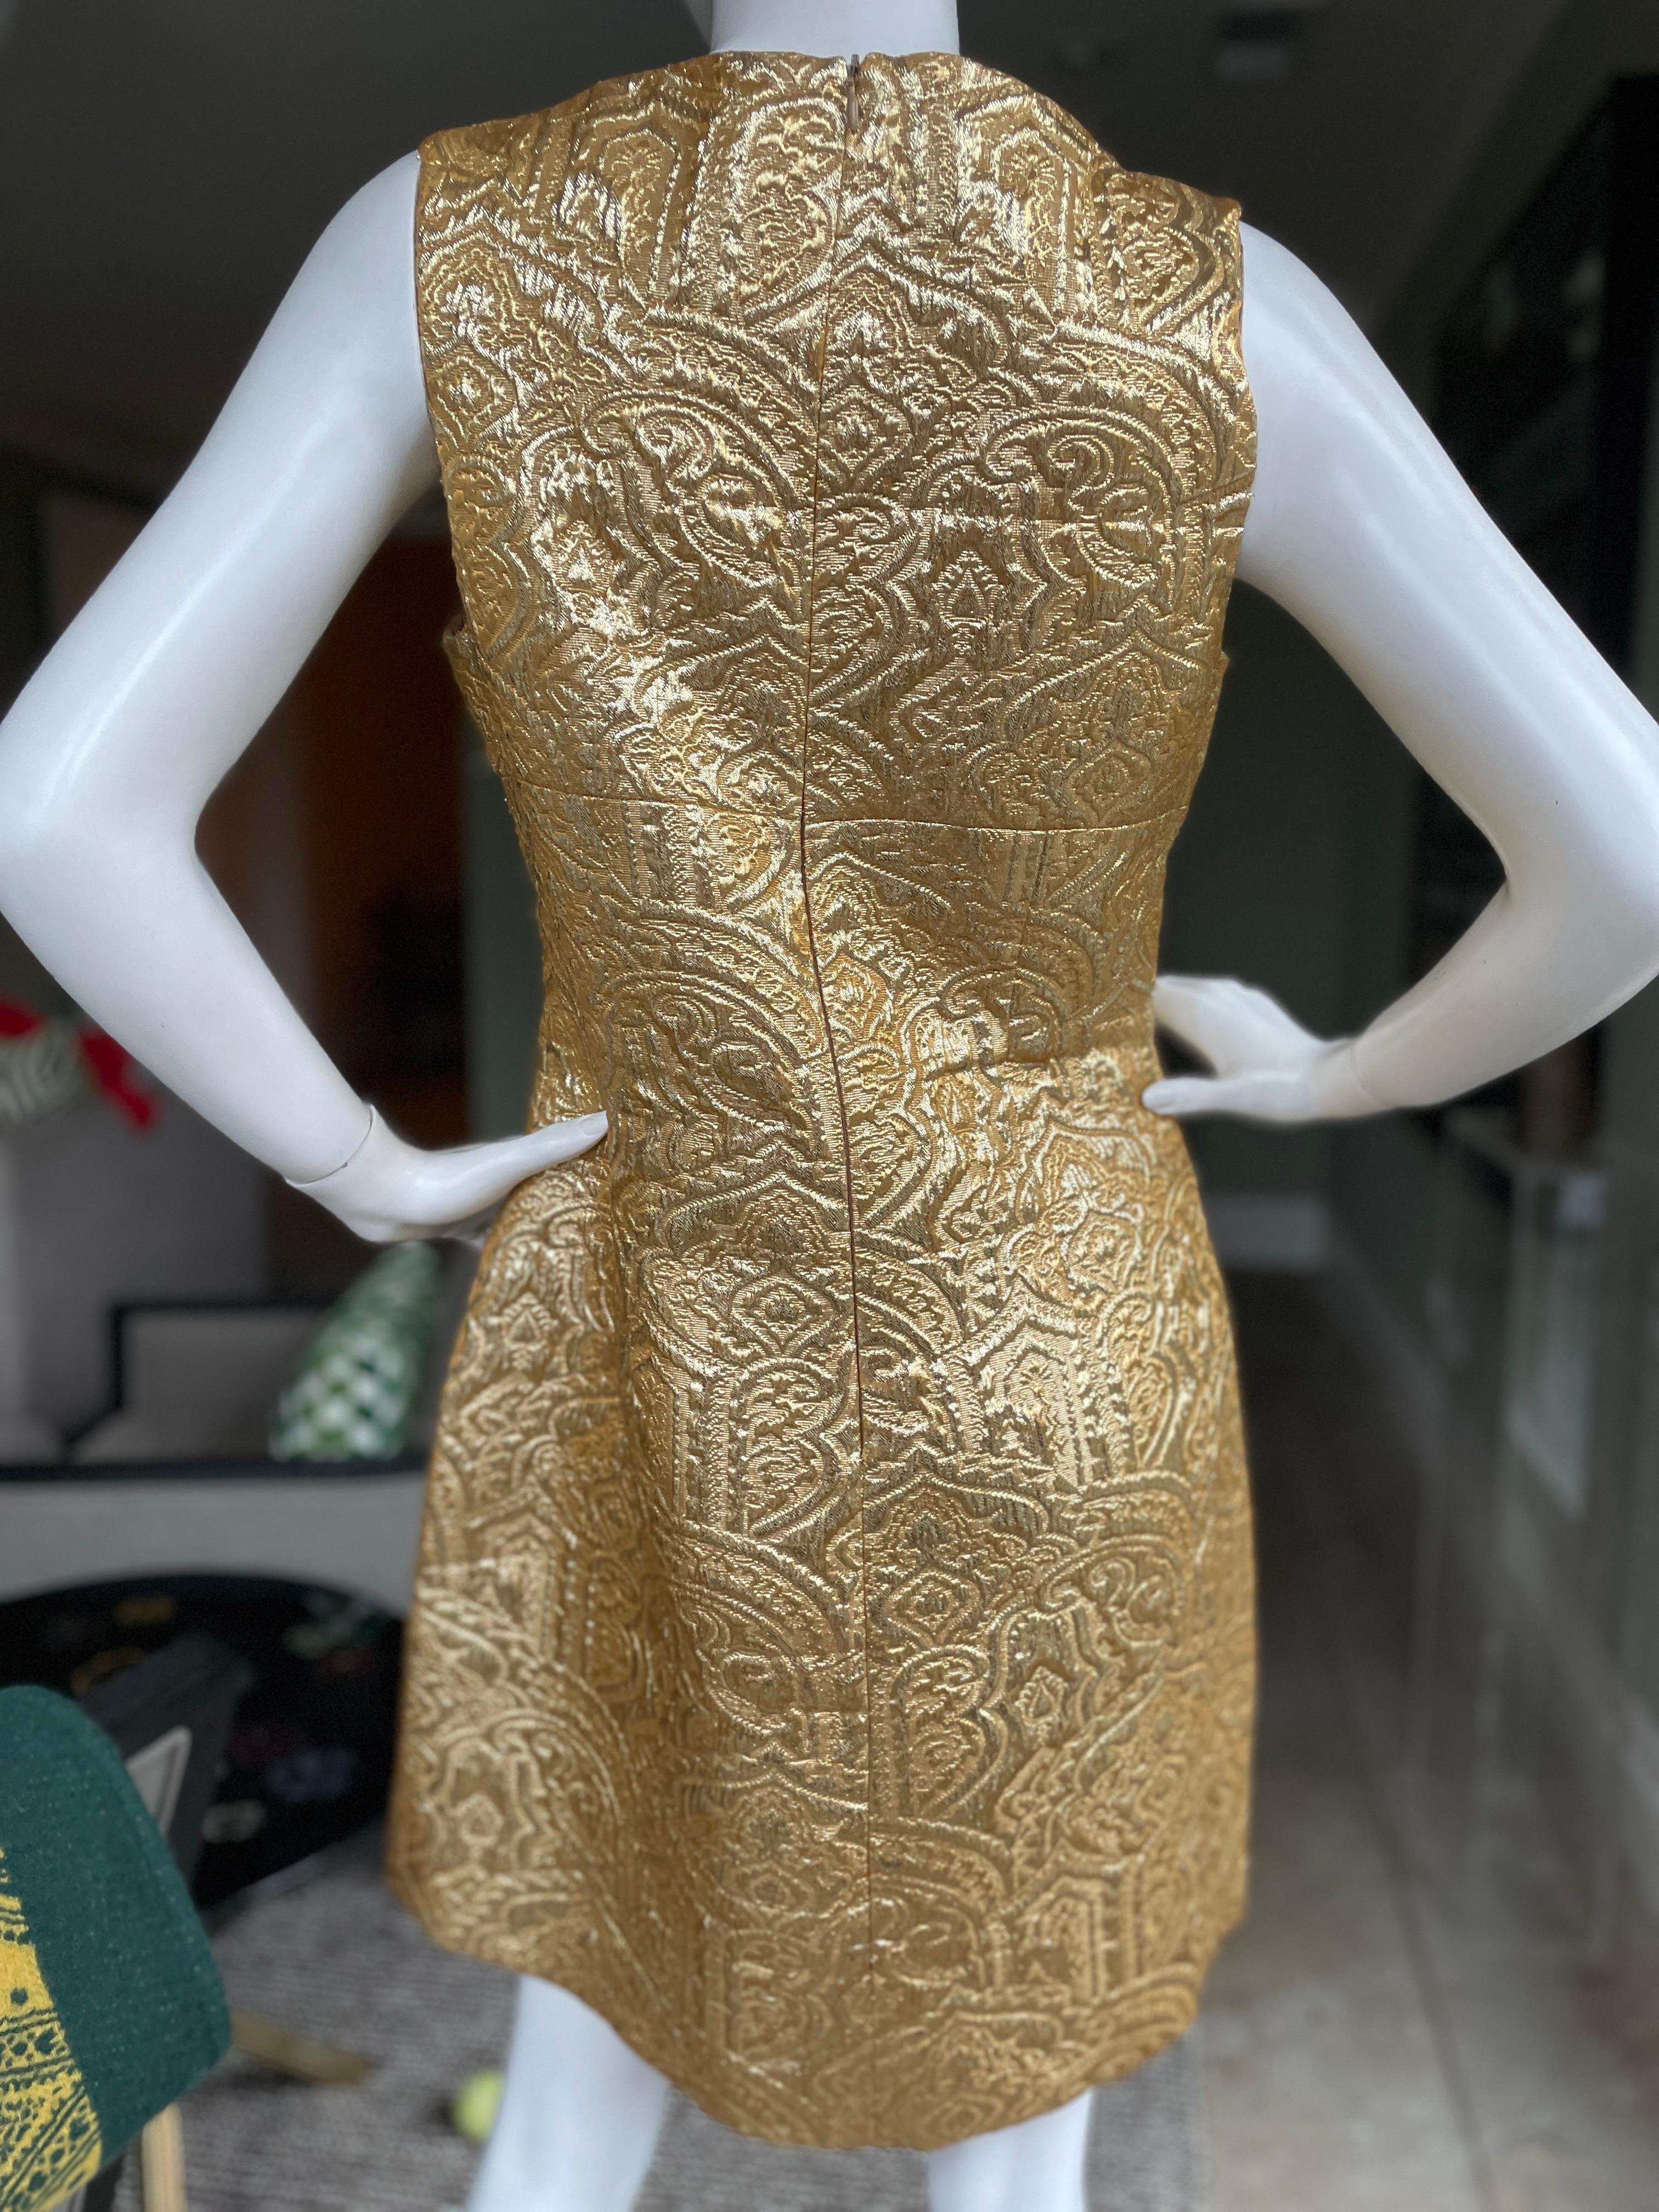 Michael Kors Collection Gold Metallic Brocade Dress In Excellent Condition For Sale In Cloverdale, CA